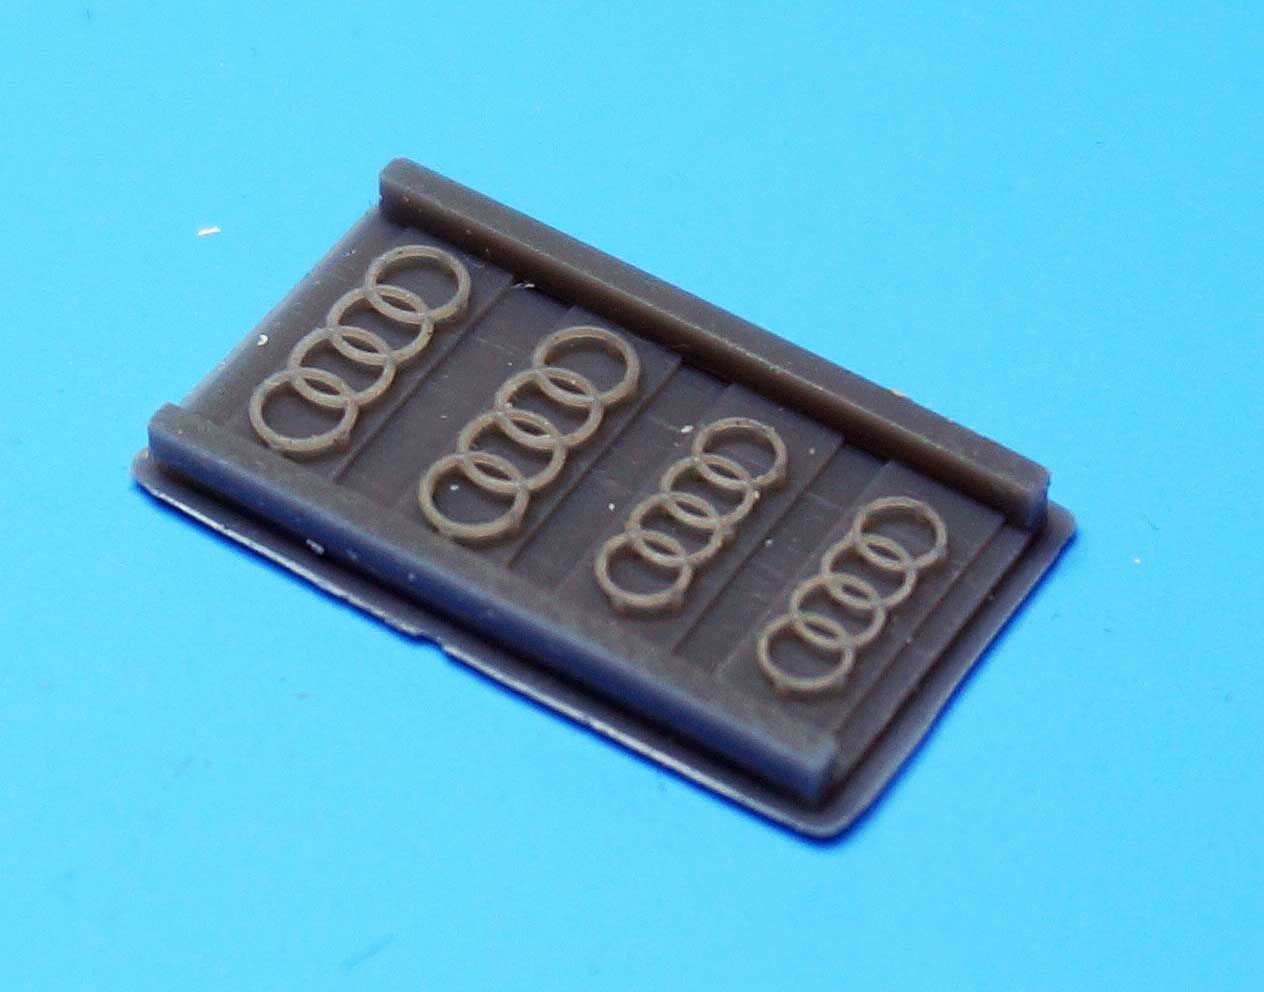 Fat Frog MD24005 R8 First Generation Front-Rear Emblems (2 set) for Revell